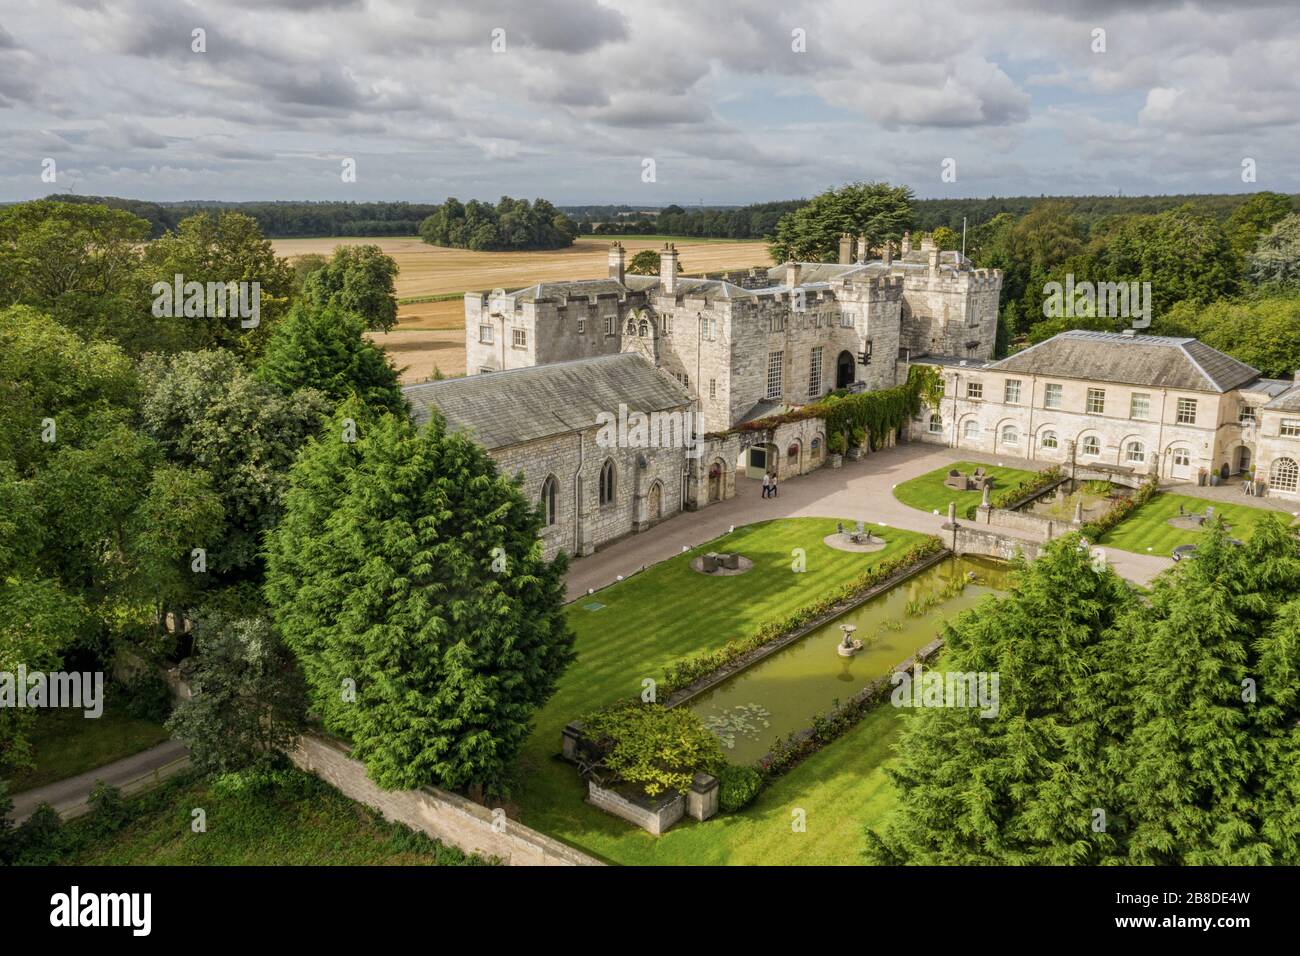 Hazlewood Castle Hotel and Spa, wedding venue and castle in Yorkshire located close to the A64 near Leeds and York. Summer view of the courtyard Stock Photo